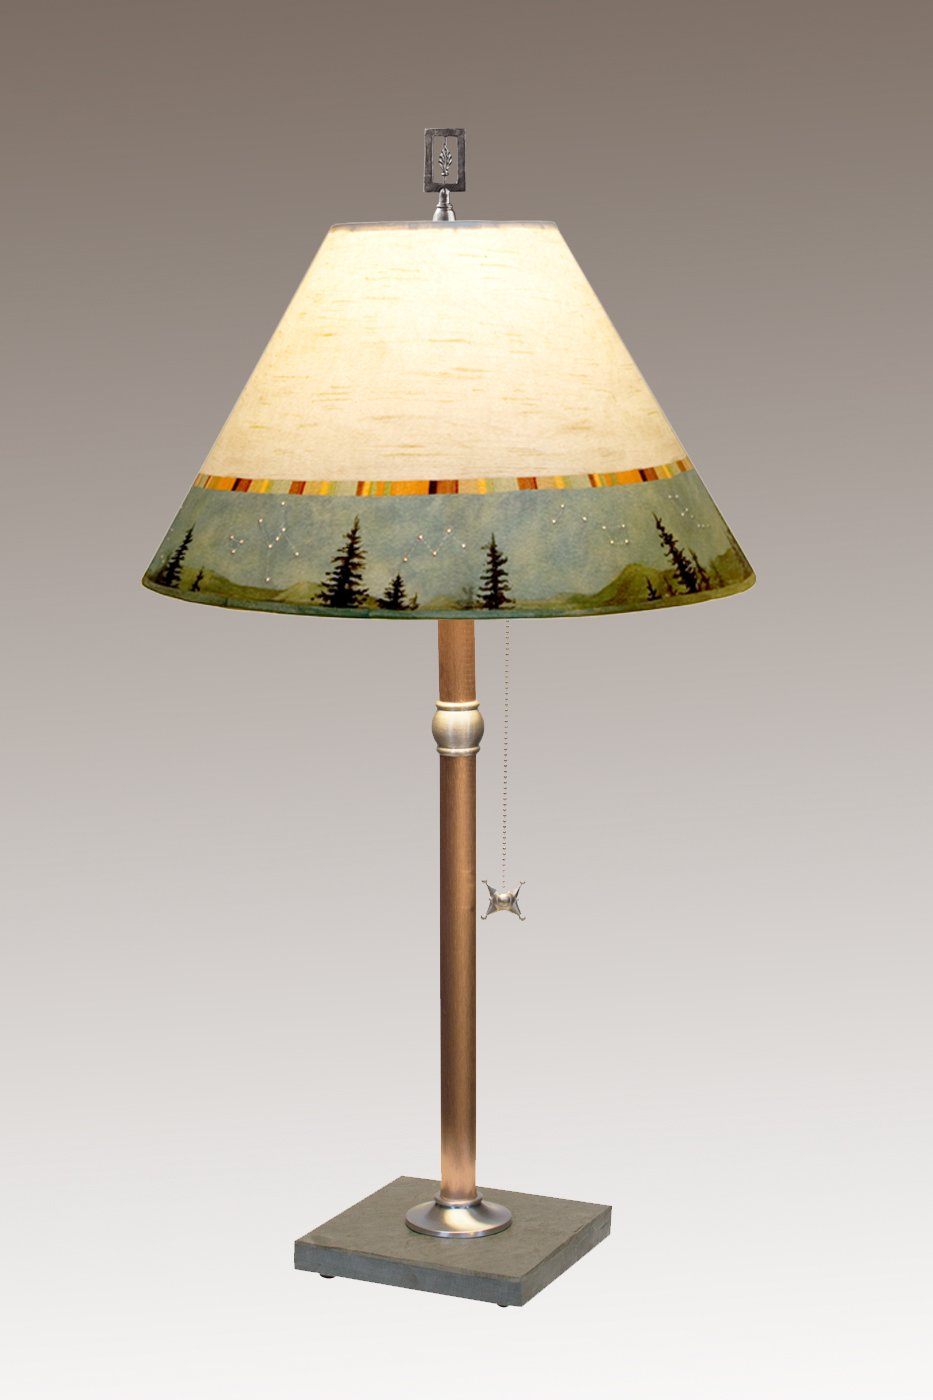 Janna Ugone & Co Table Lamps Copper Table Lamp with Medium Conical Shade in Birch Midnight